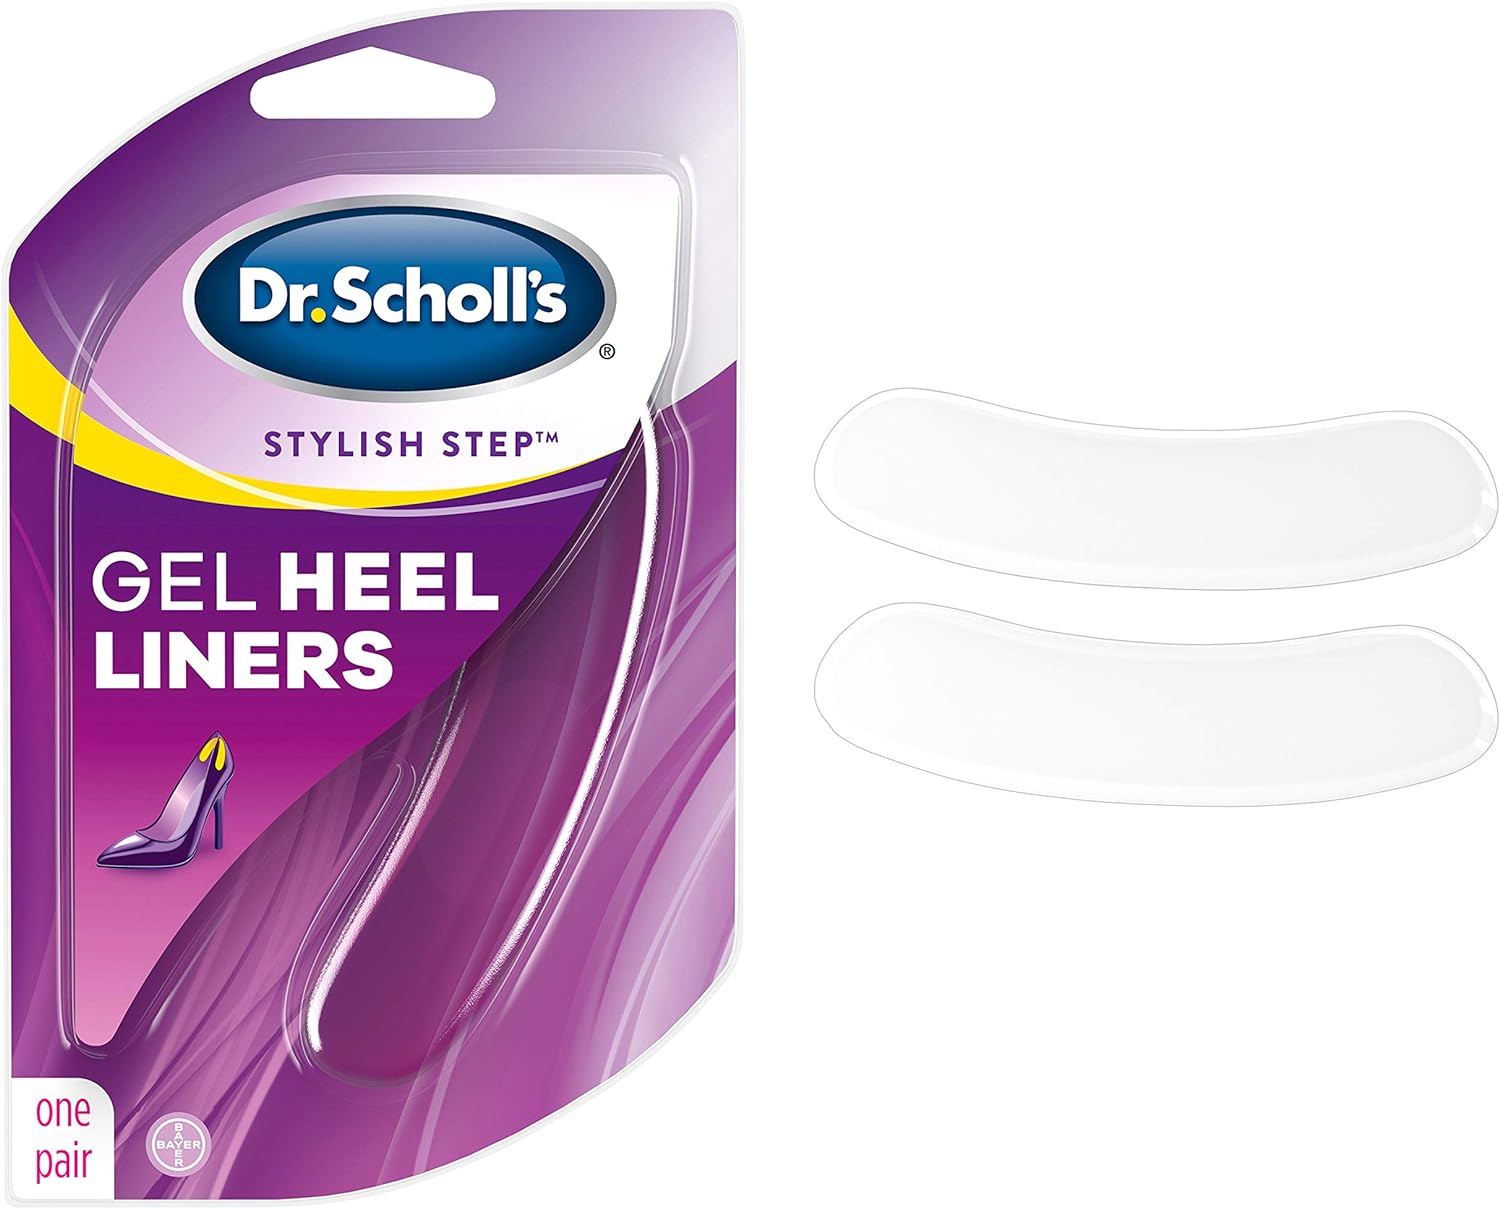 Dr. Scholls Stylish Step Gel Heel Liners, 1 Pair - One Size fits All